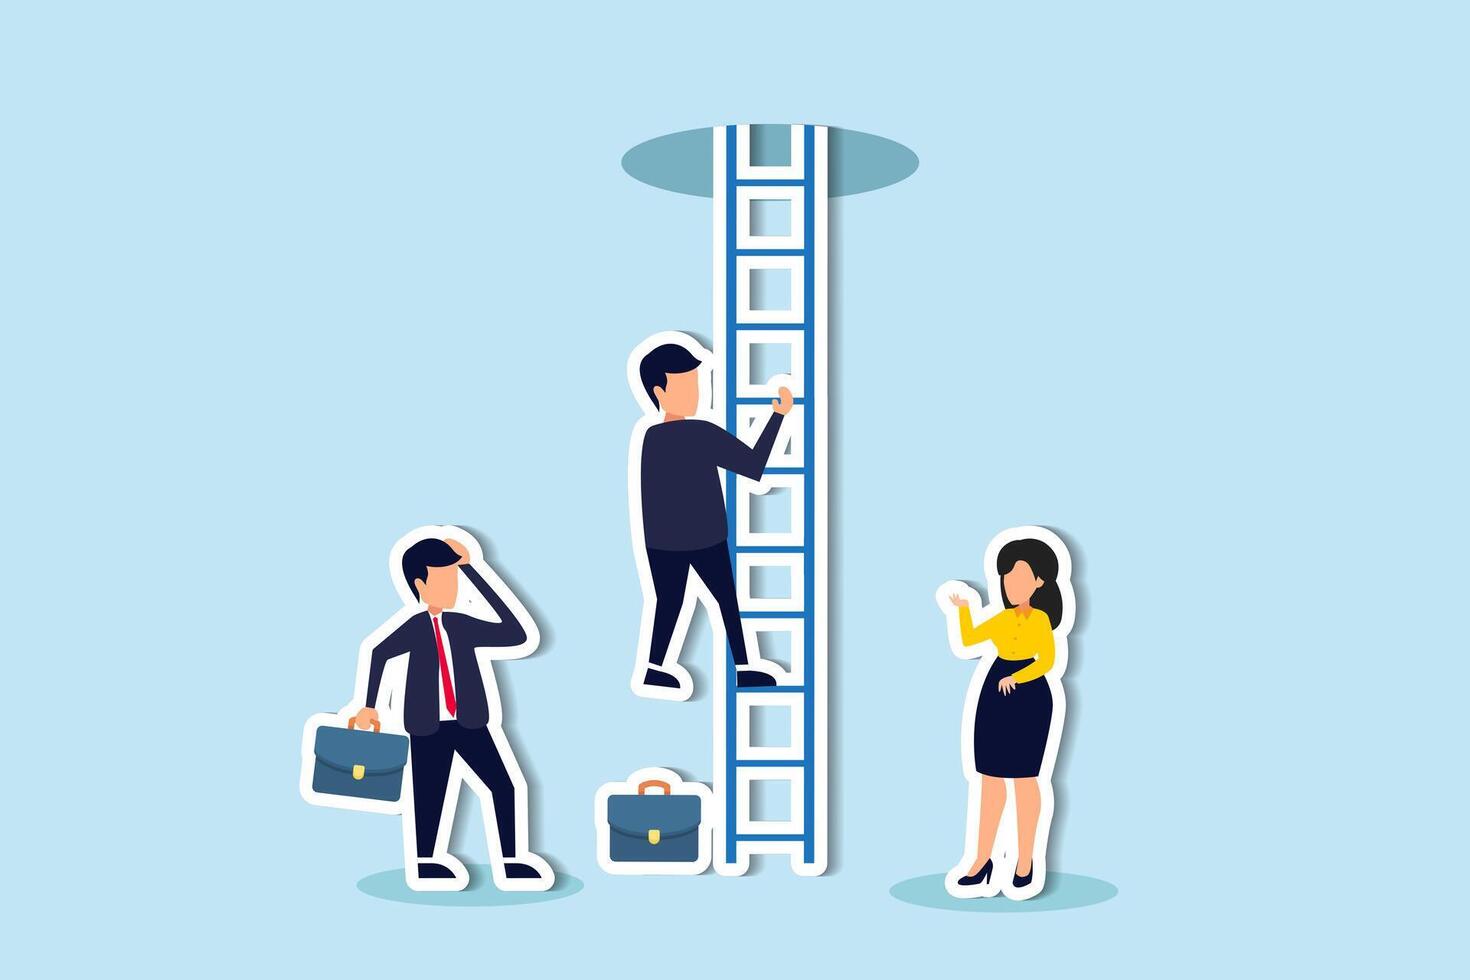 Motivation and hopefulness drive problem solving, facing challenges with courage to attain freedom and overcome fear concept, businessman climb up ladder to light shining way out. vector